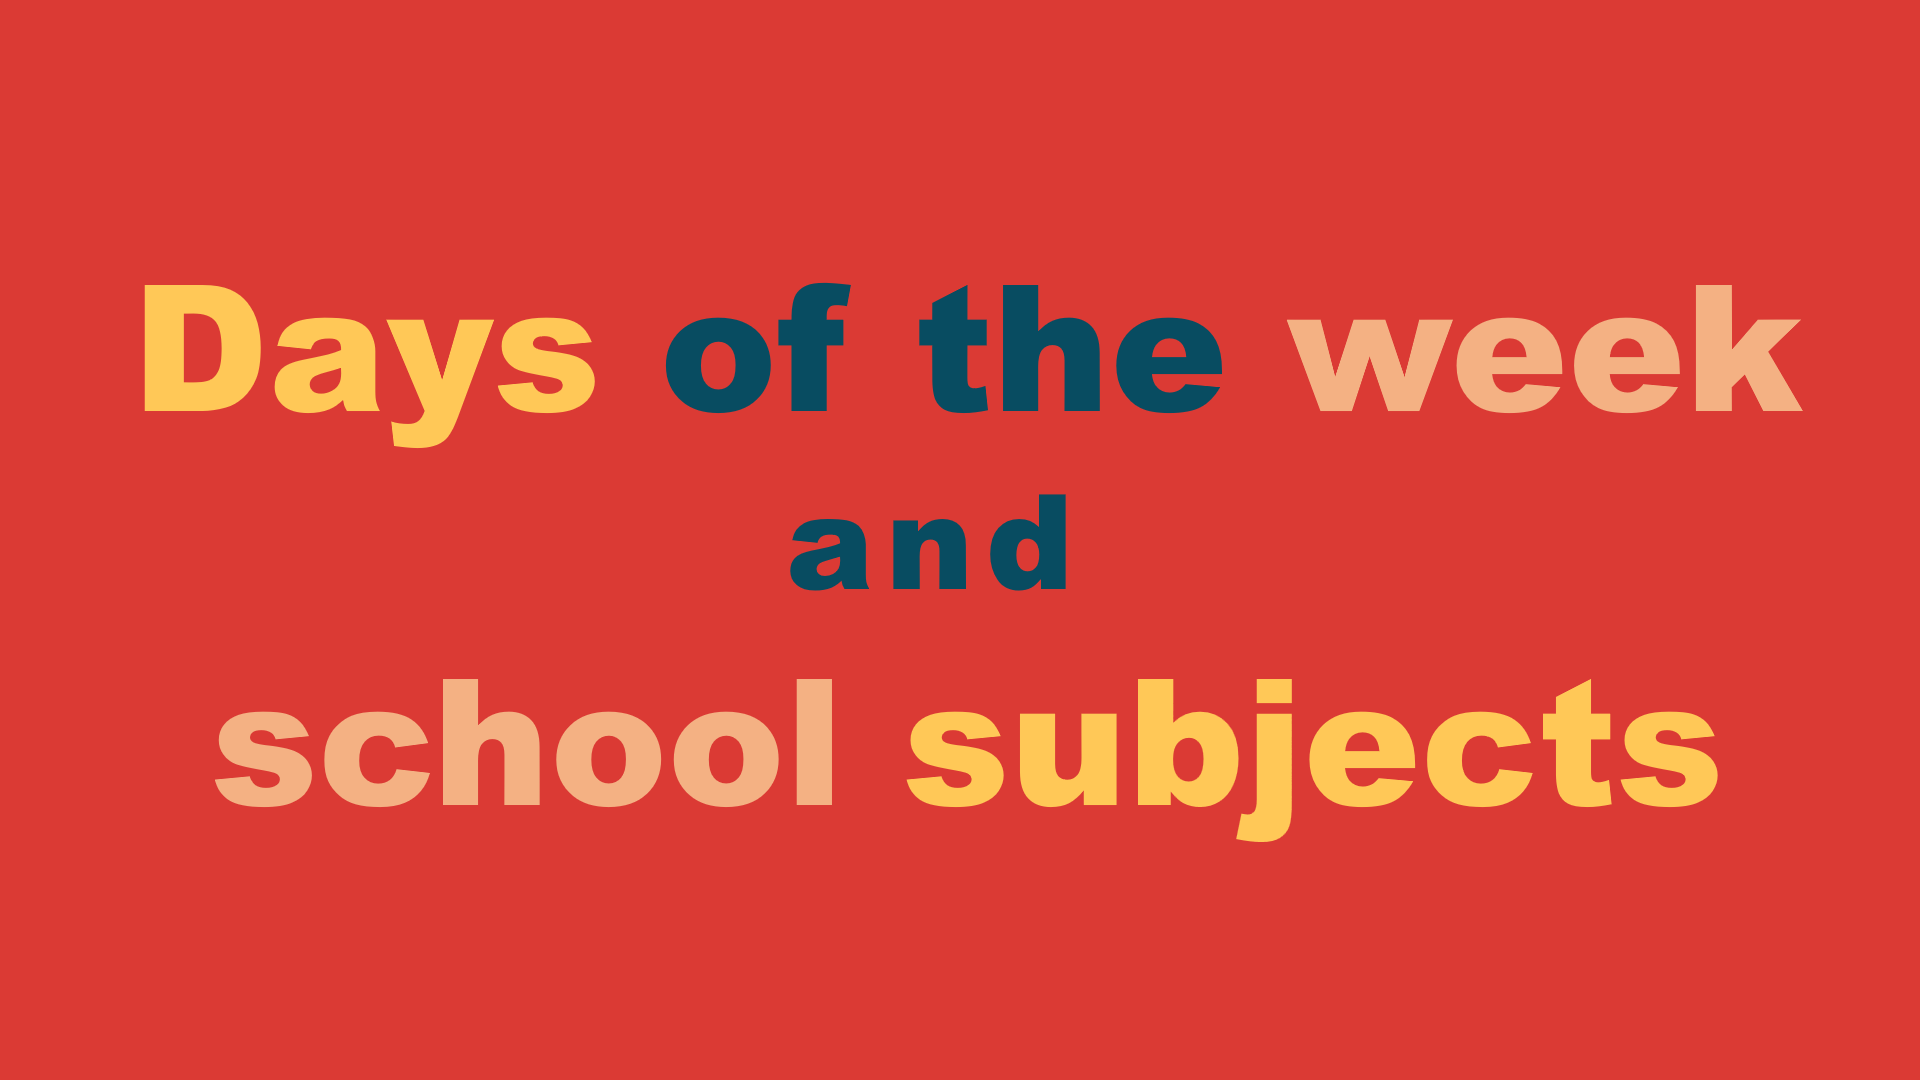 School Subjects and Days of the Week